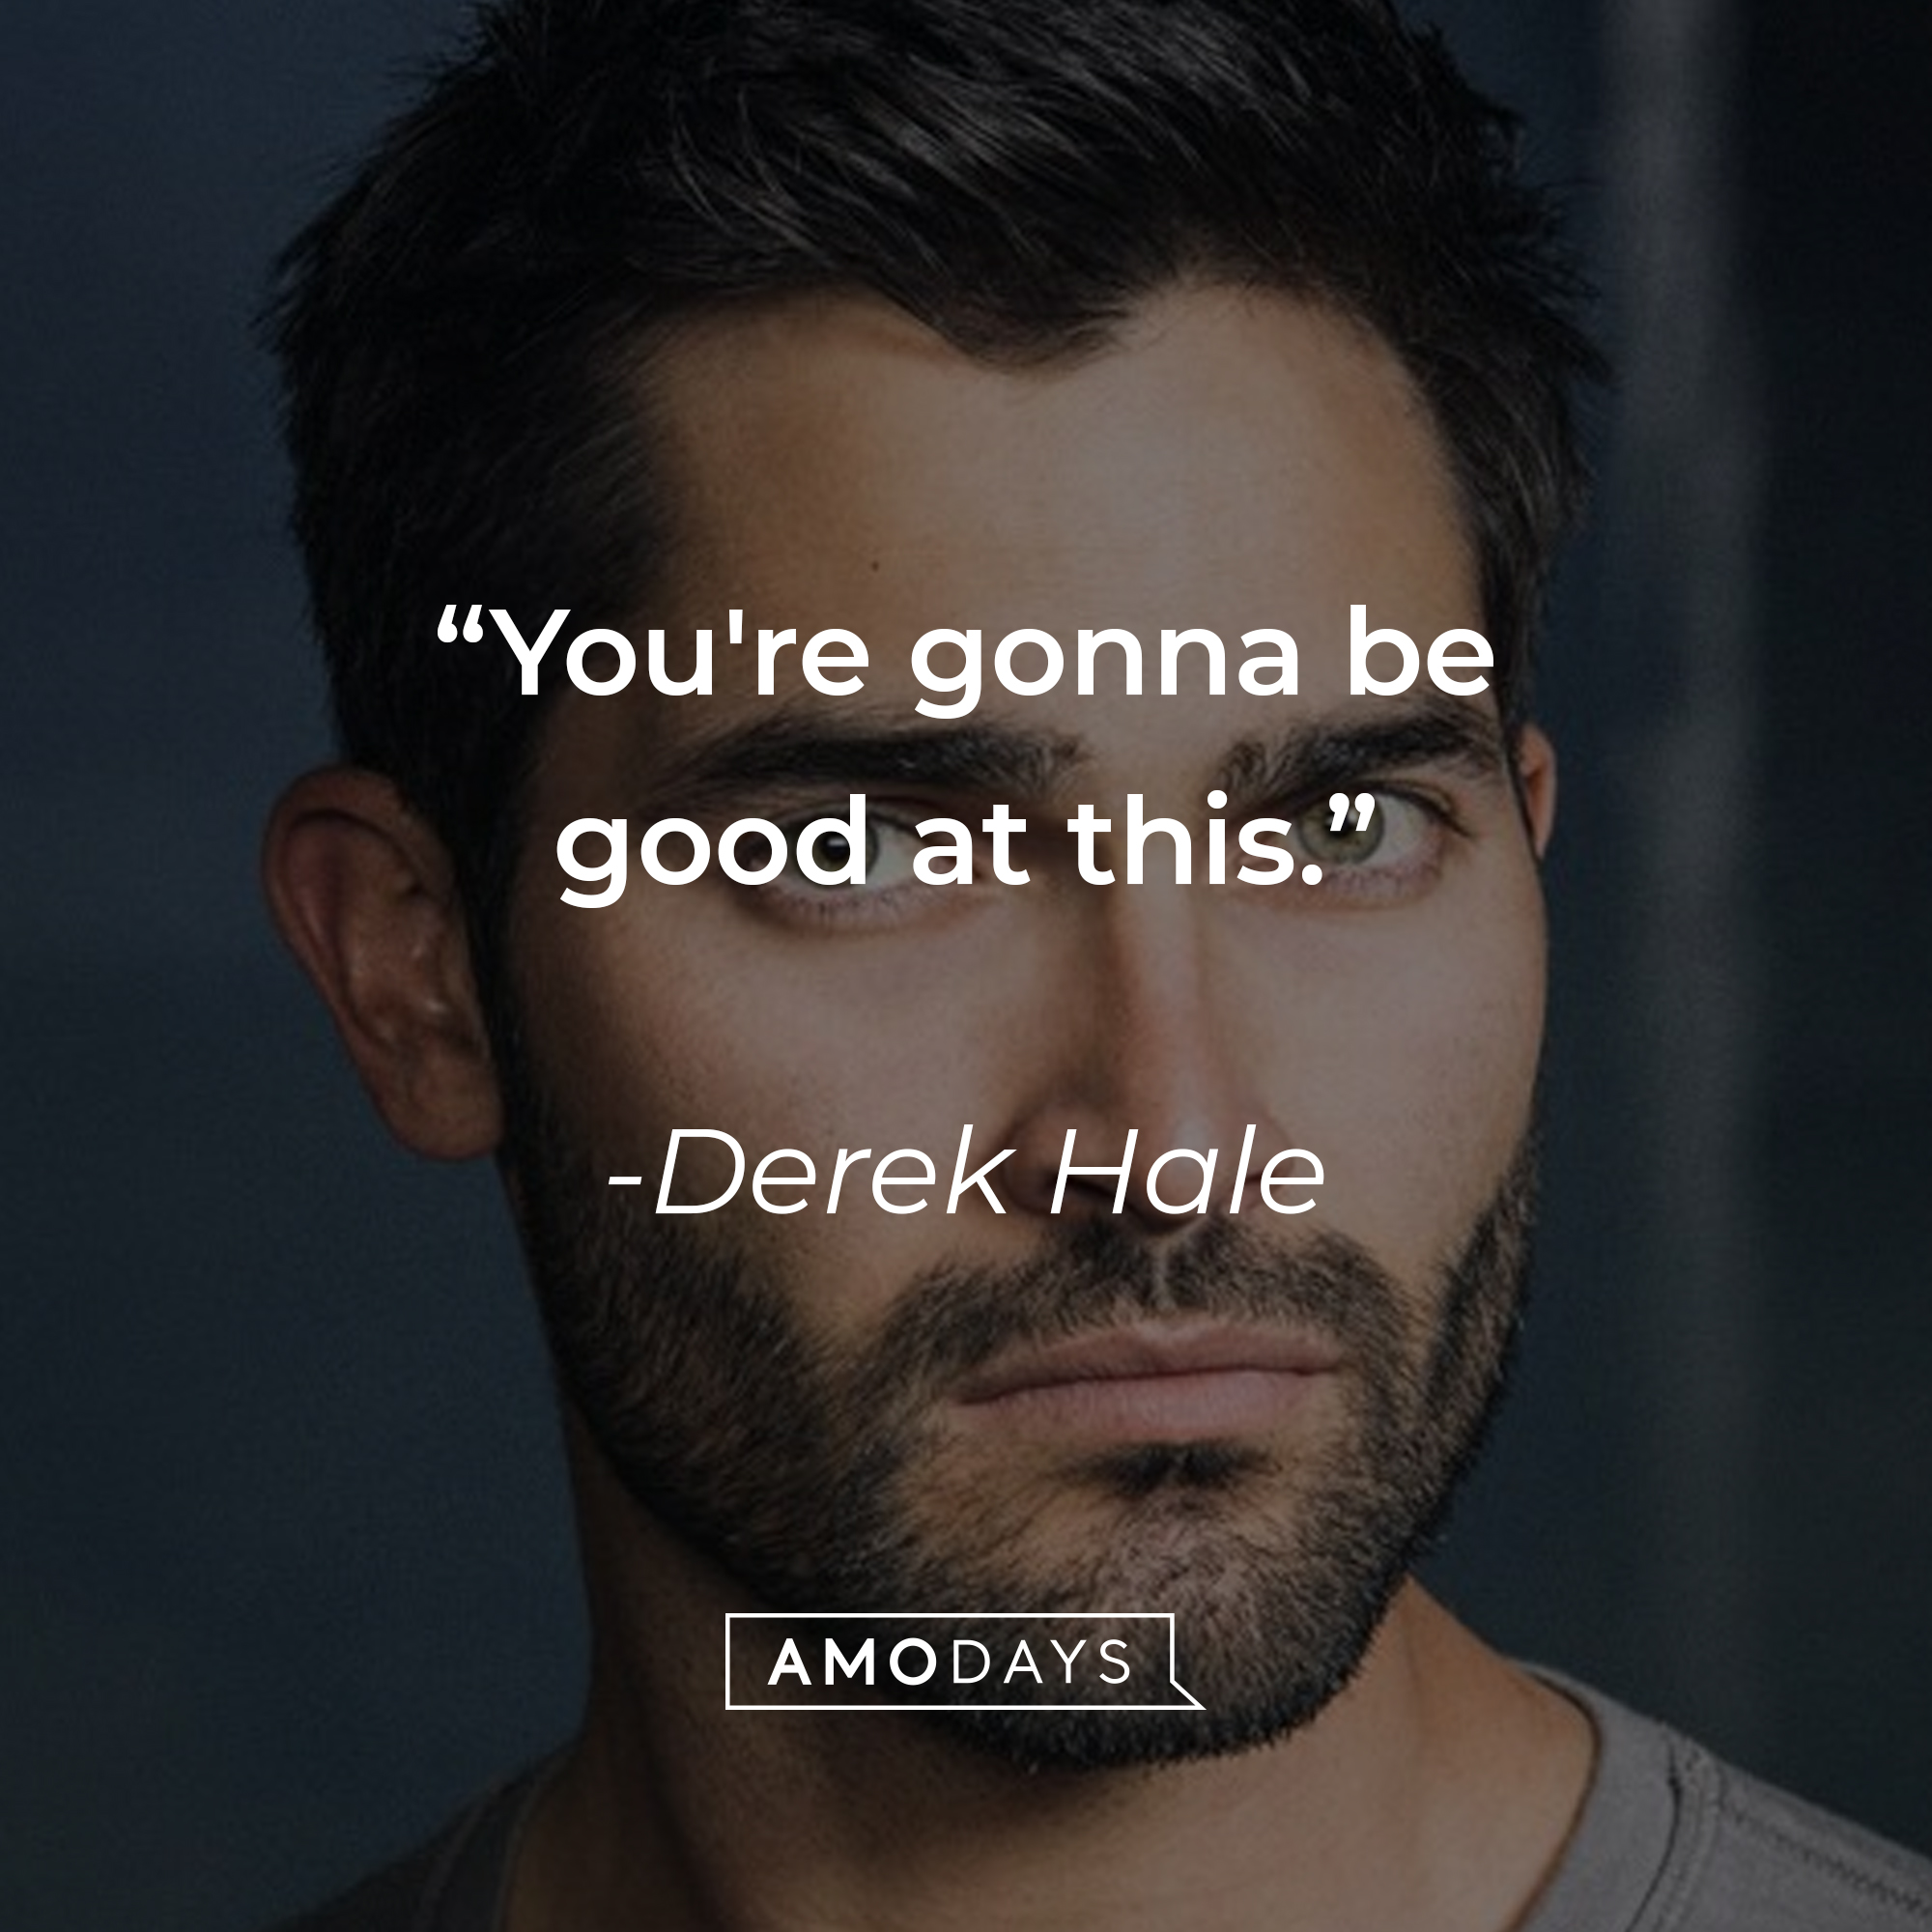 Derek Hale, with his quote: “You're gonna be good at this.” | Source: Amodays